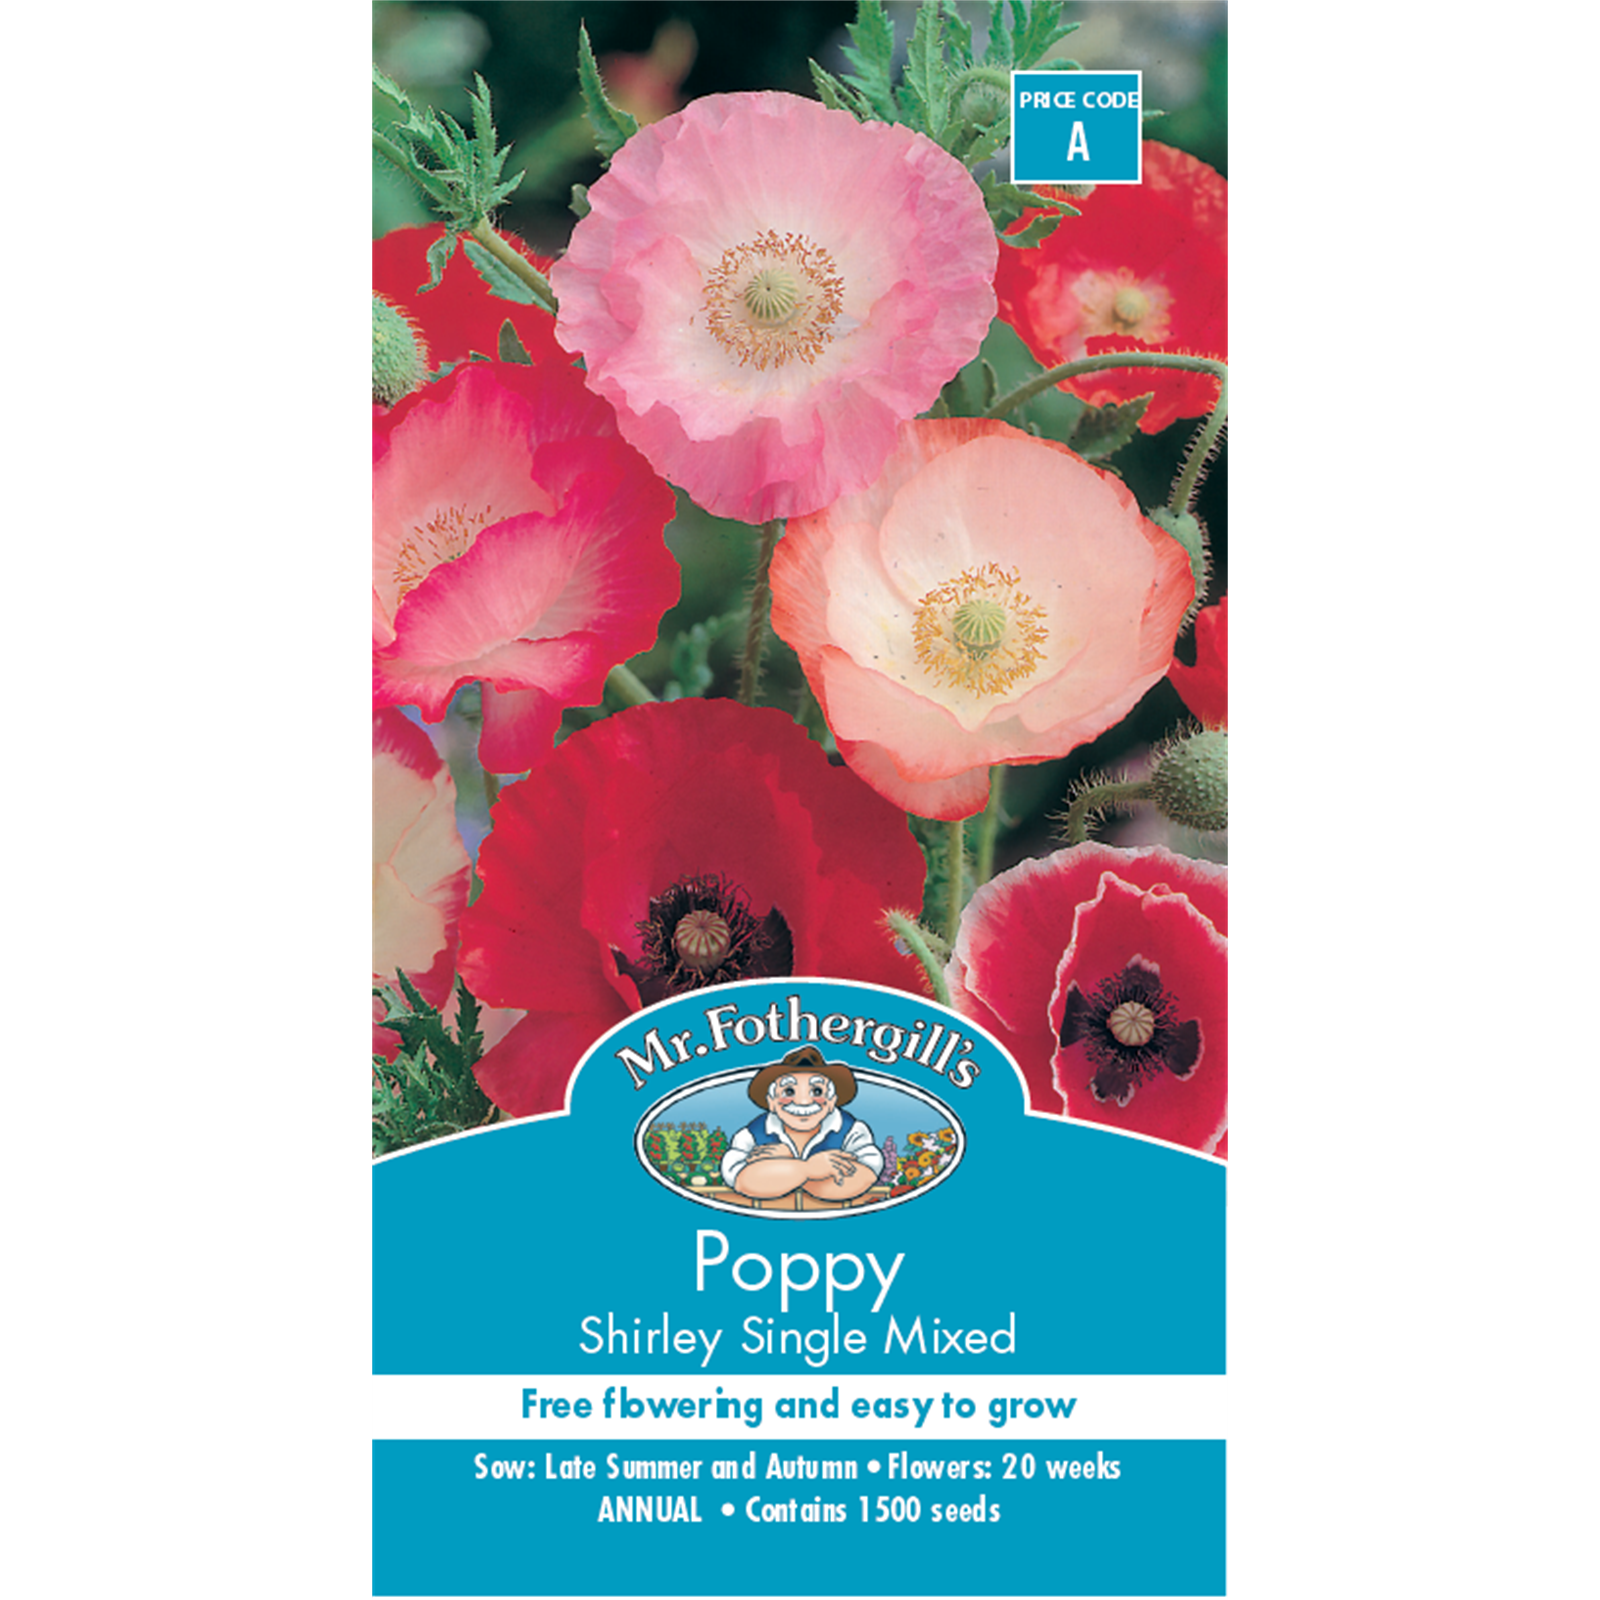 Mr Fothergill's Poppy Shirley Single Mixed Flower Seeds